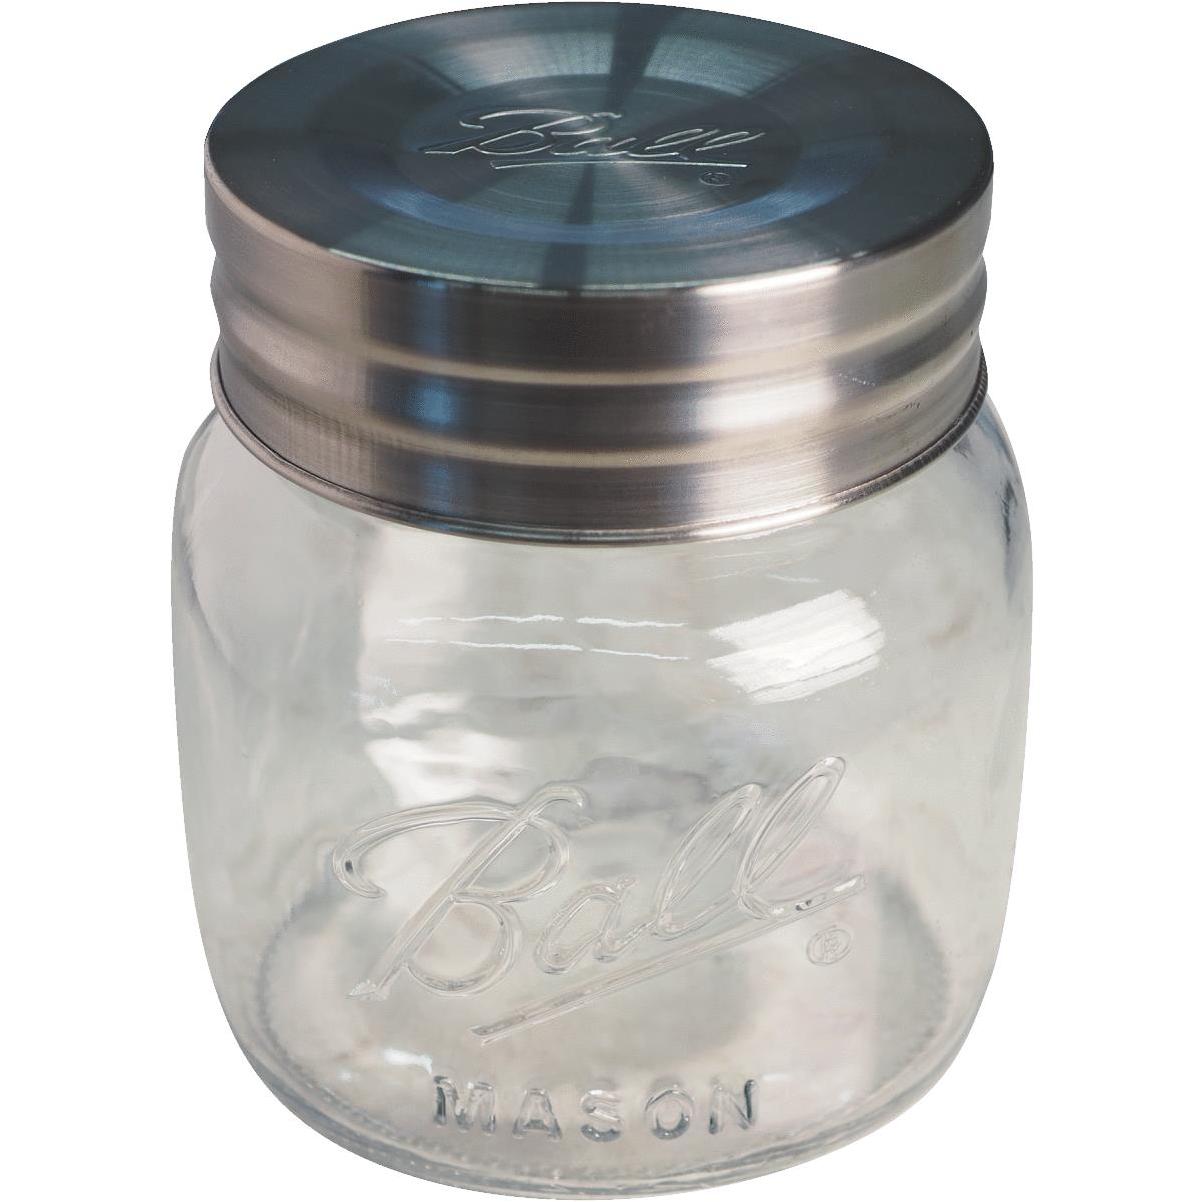 Ball Wide Mouth Half Gallon Jars - 6 count